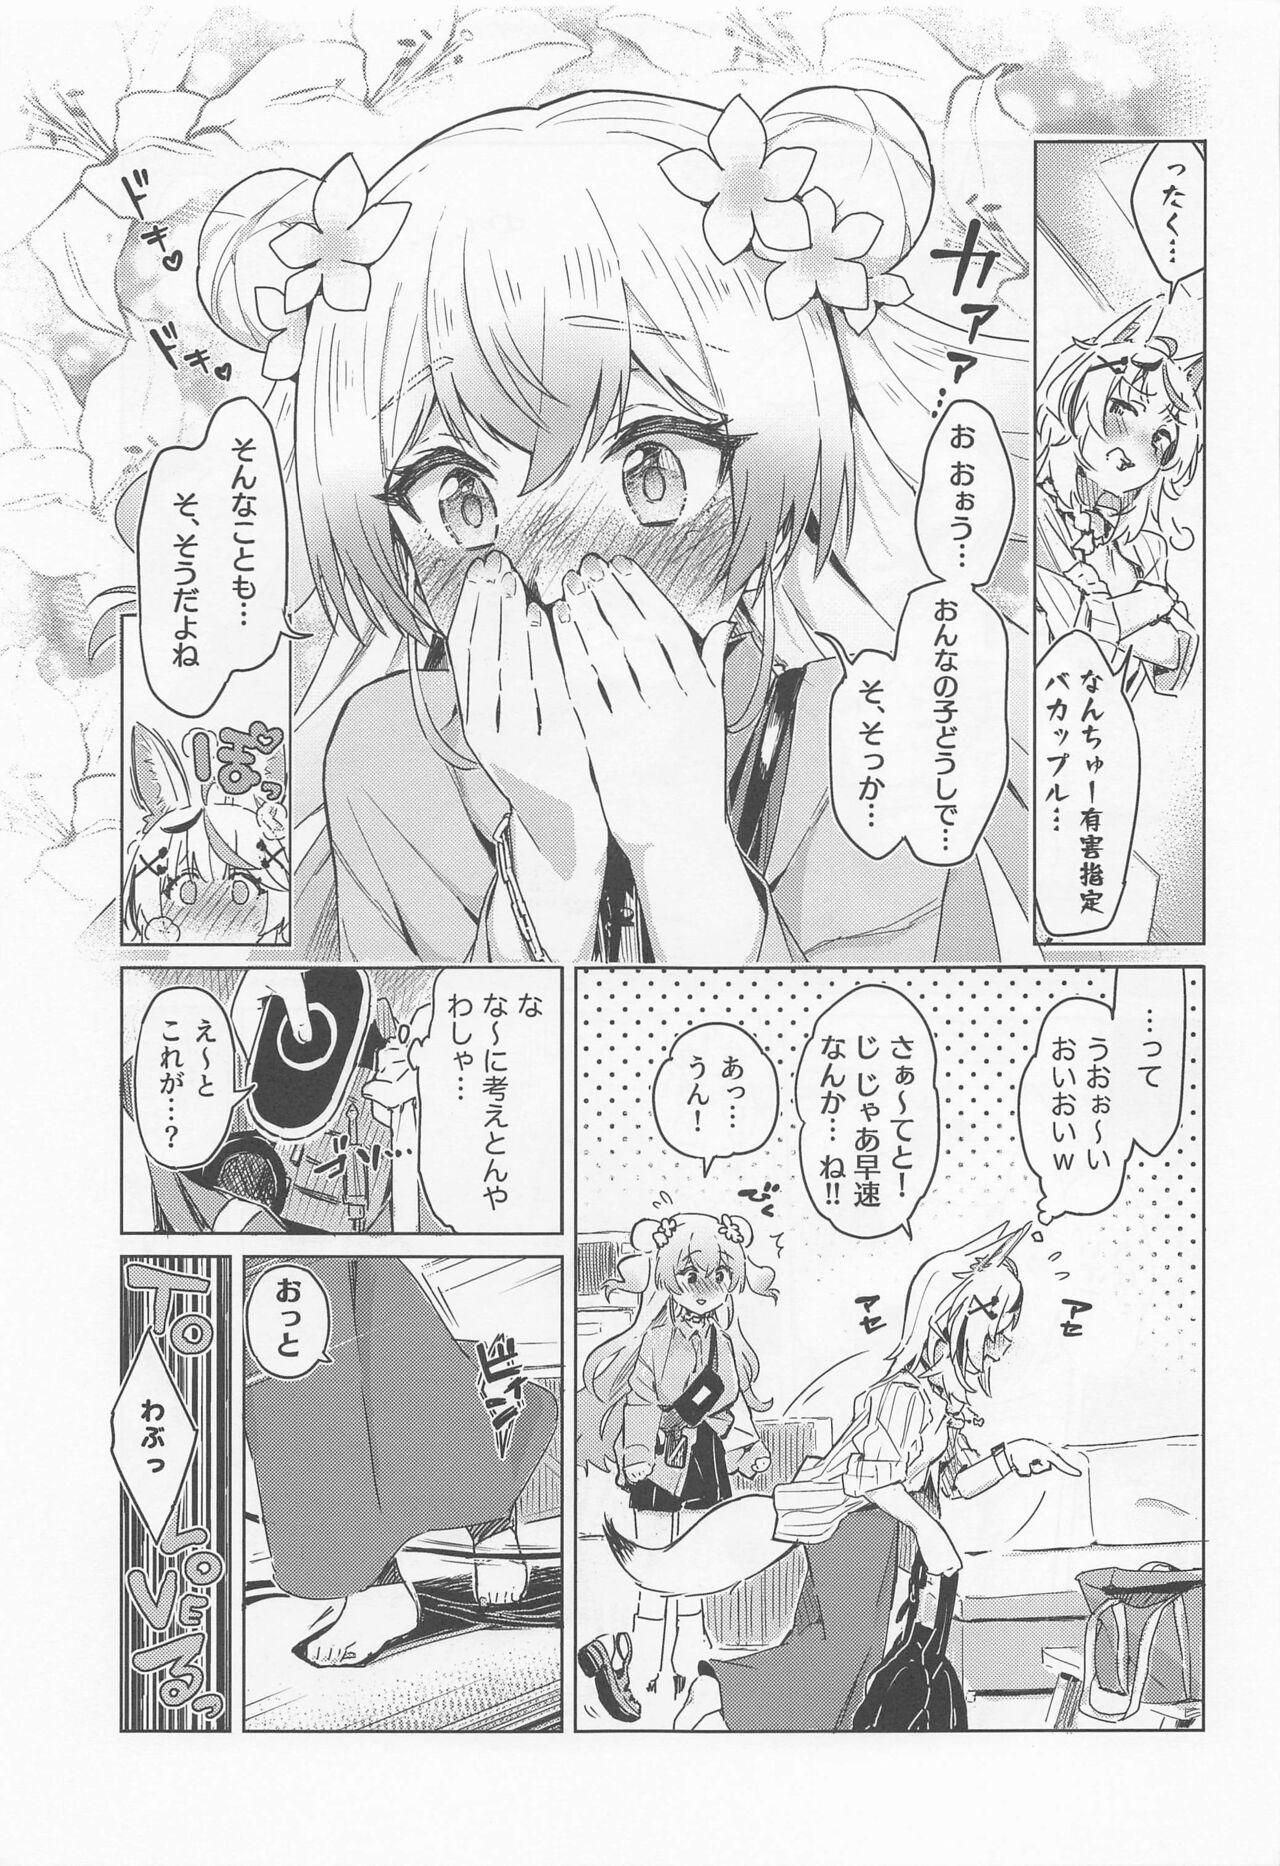 Dildos Fennec wa Iseijin no Yume o Miru ka - Does The Fennec Dream of The Lovely Visitor? - Hololive Gay - Page 10